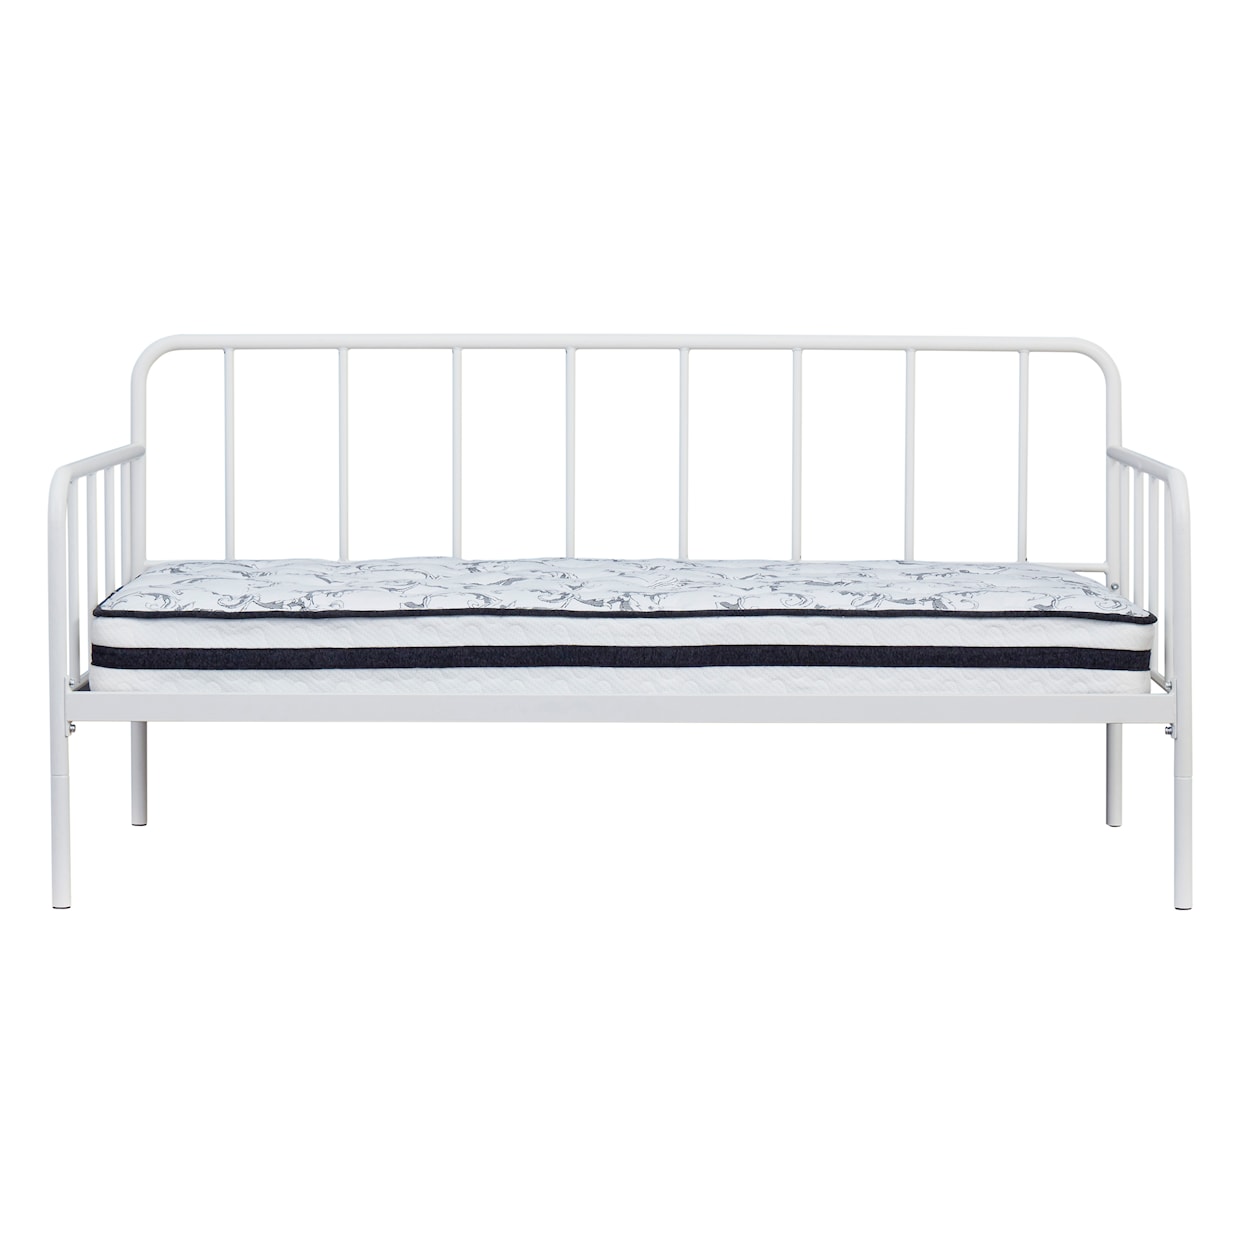 Signature Design by Ashley Trentlore Twin Metal Day Bed with Platform